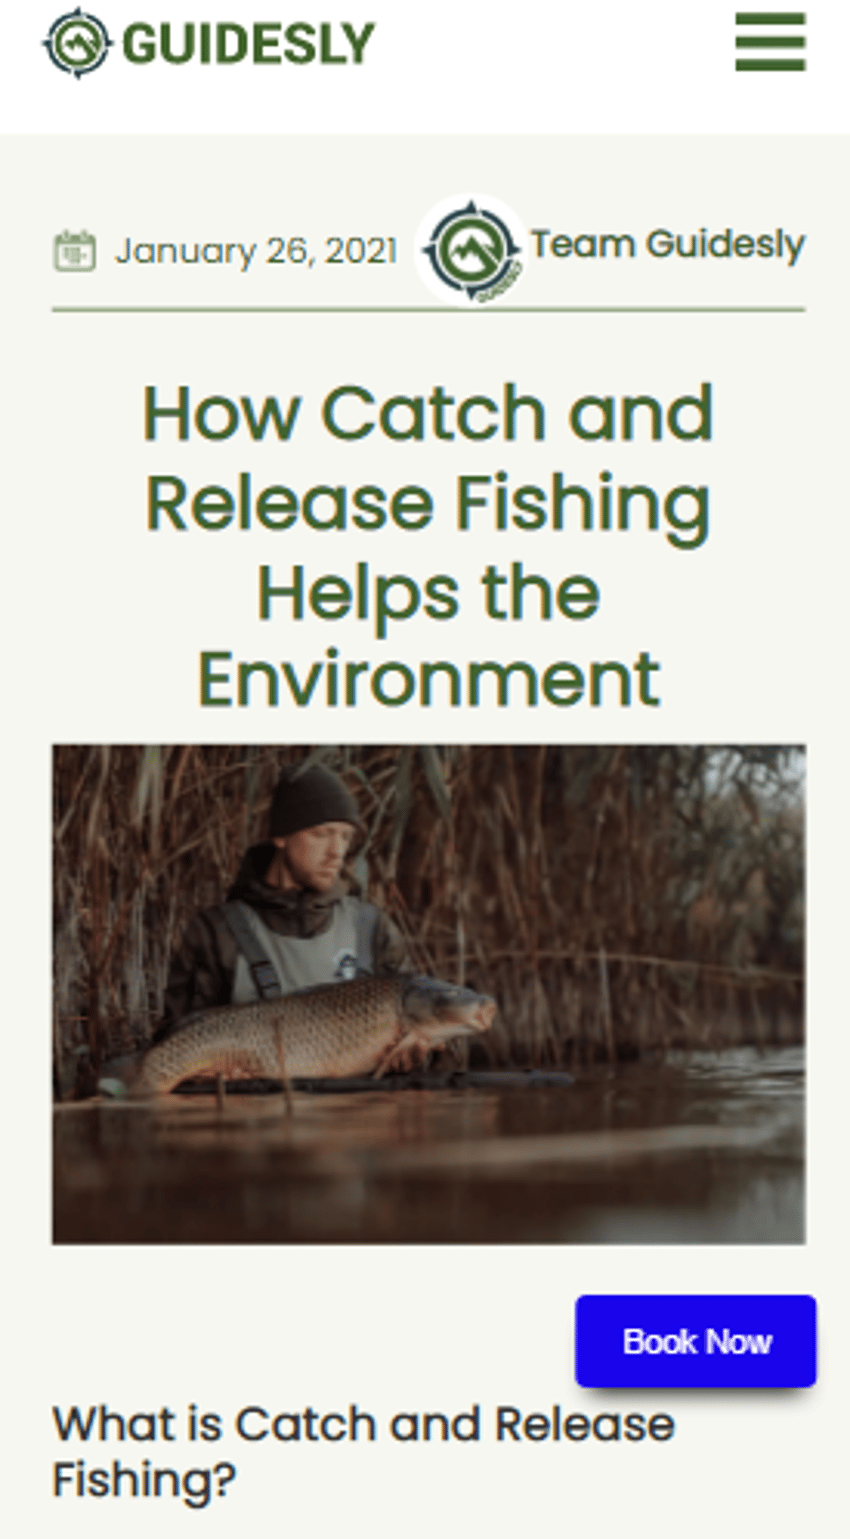 check out the full post [here](https://guidesly.com/fishing/blog/how-catch-and-release-fishing-helps-the-environment)